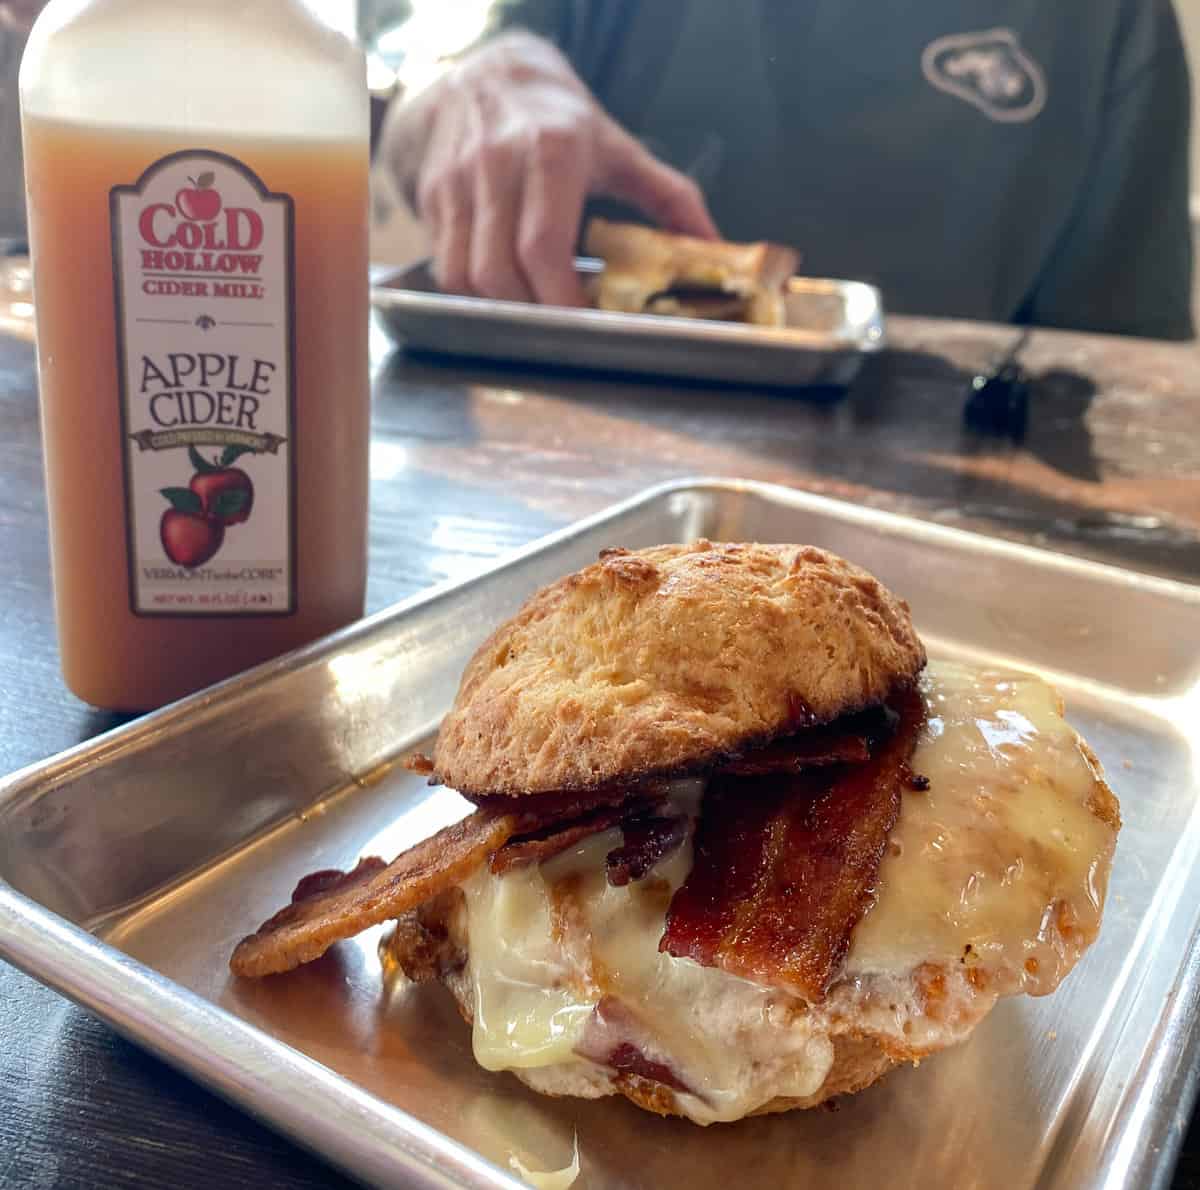 Bacon egg breakfast sandwich on tray with bottle of cider.